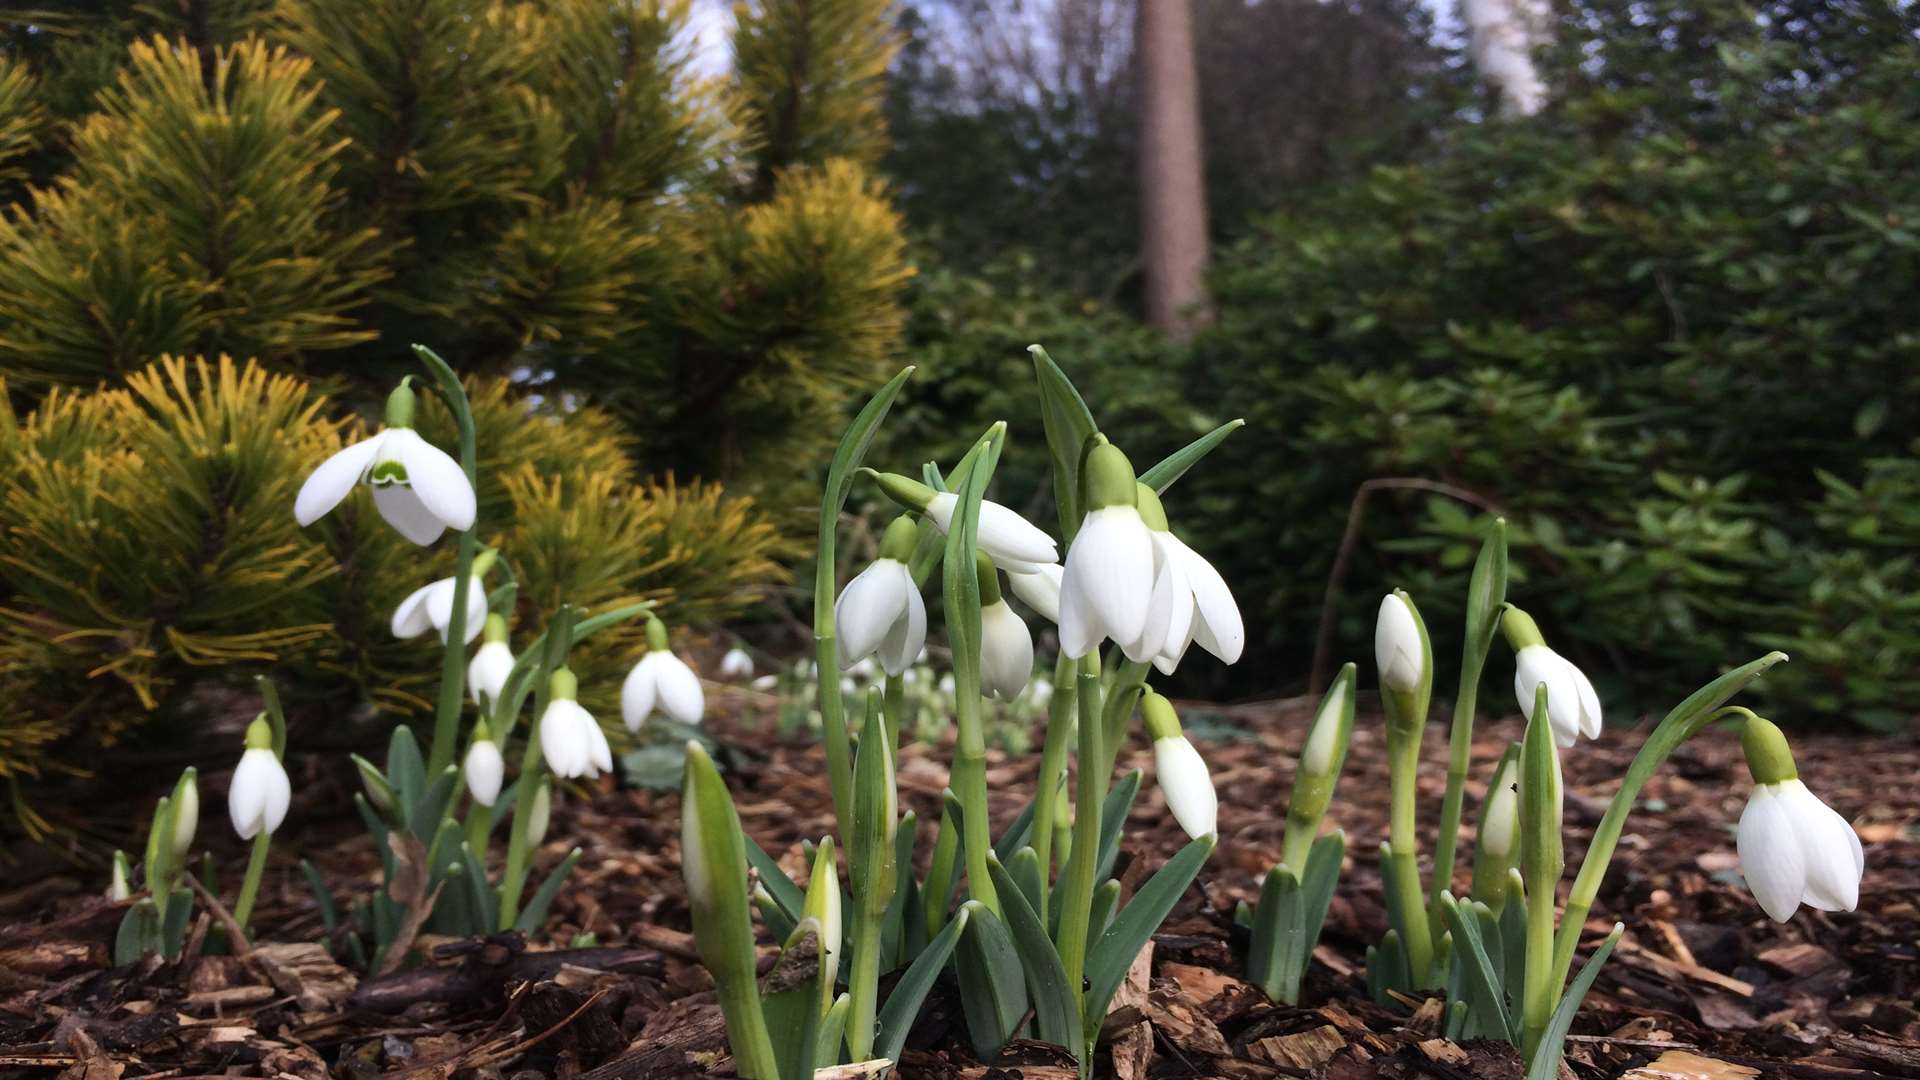 Snowdrops in the woods at Great Comp Garden near Borough Green